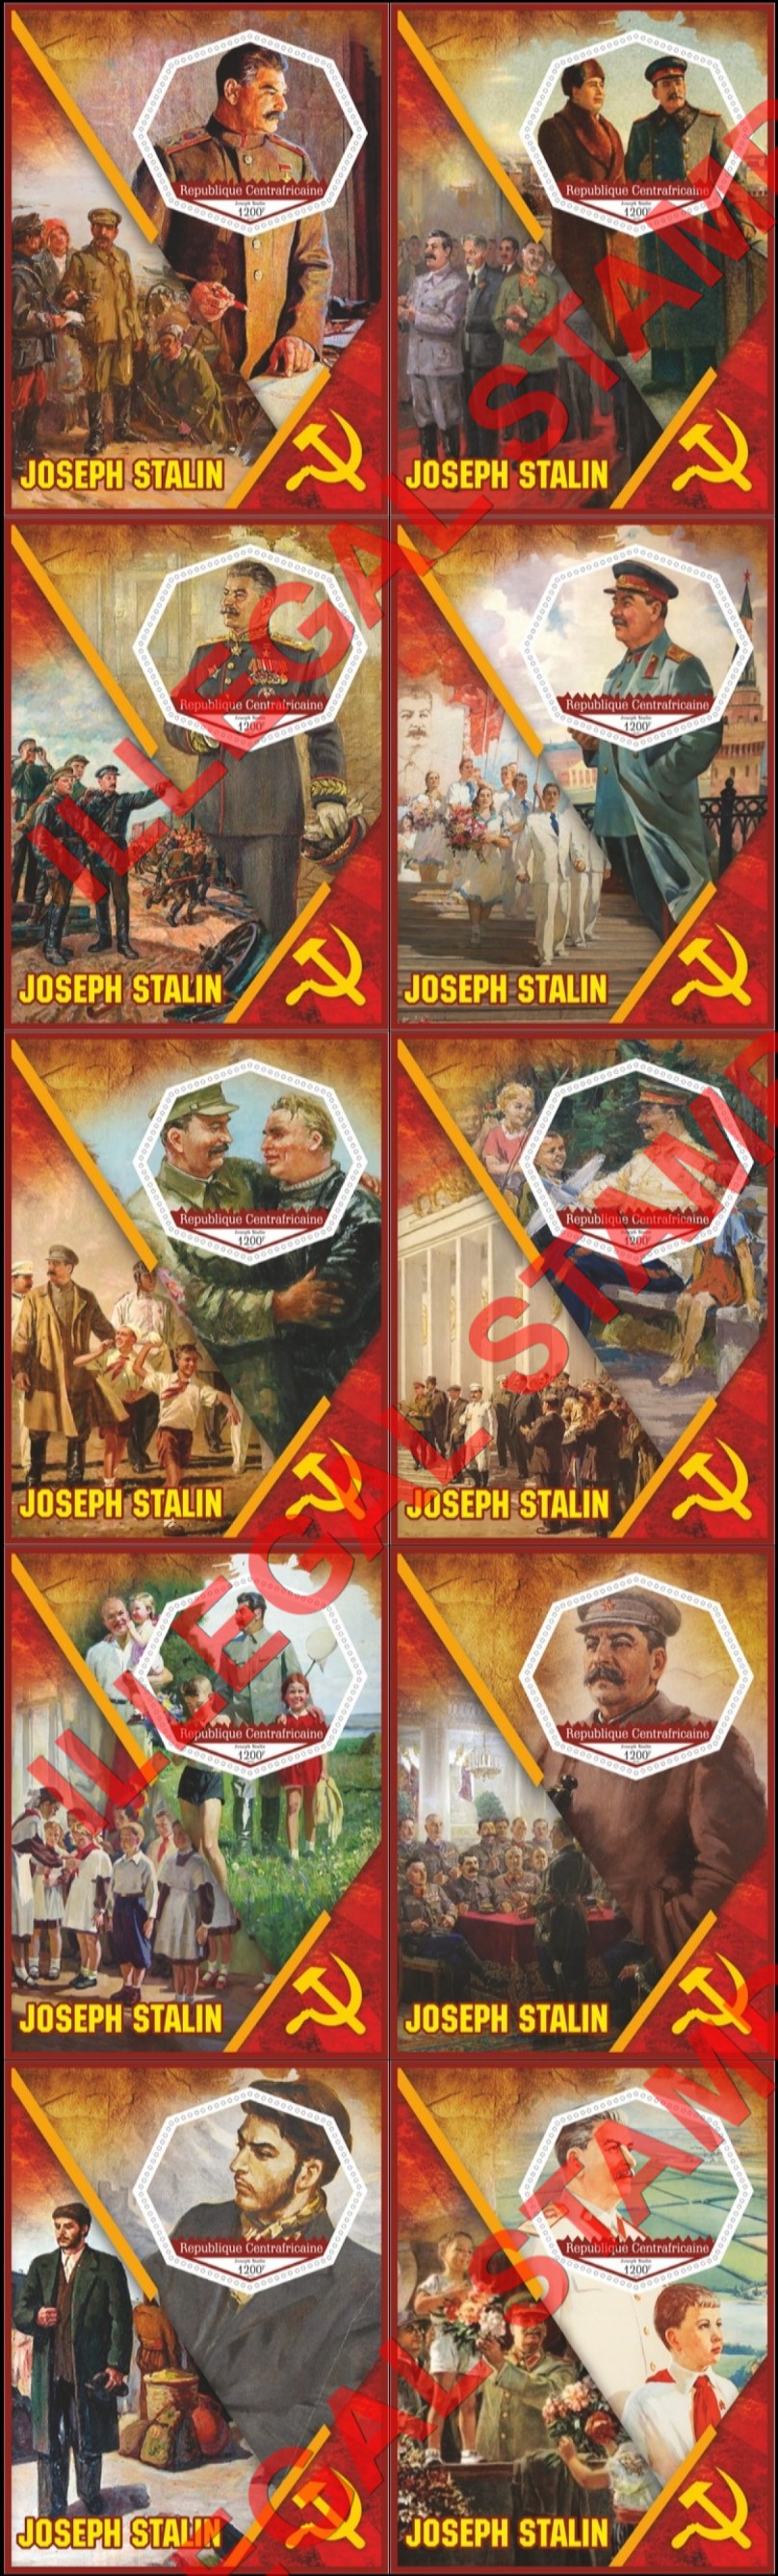 Central African Republic 2020 Joseph Stalin Illegal Stamp Souvenir Sheets of 1